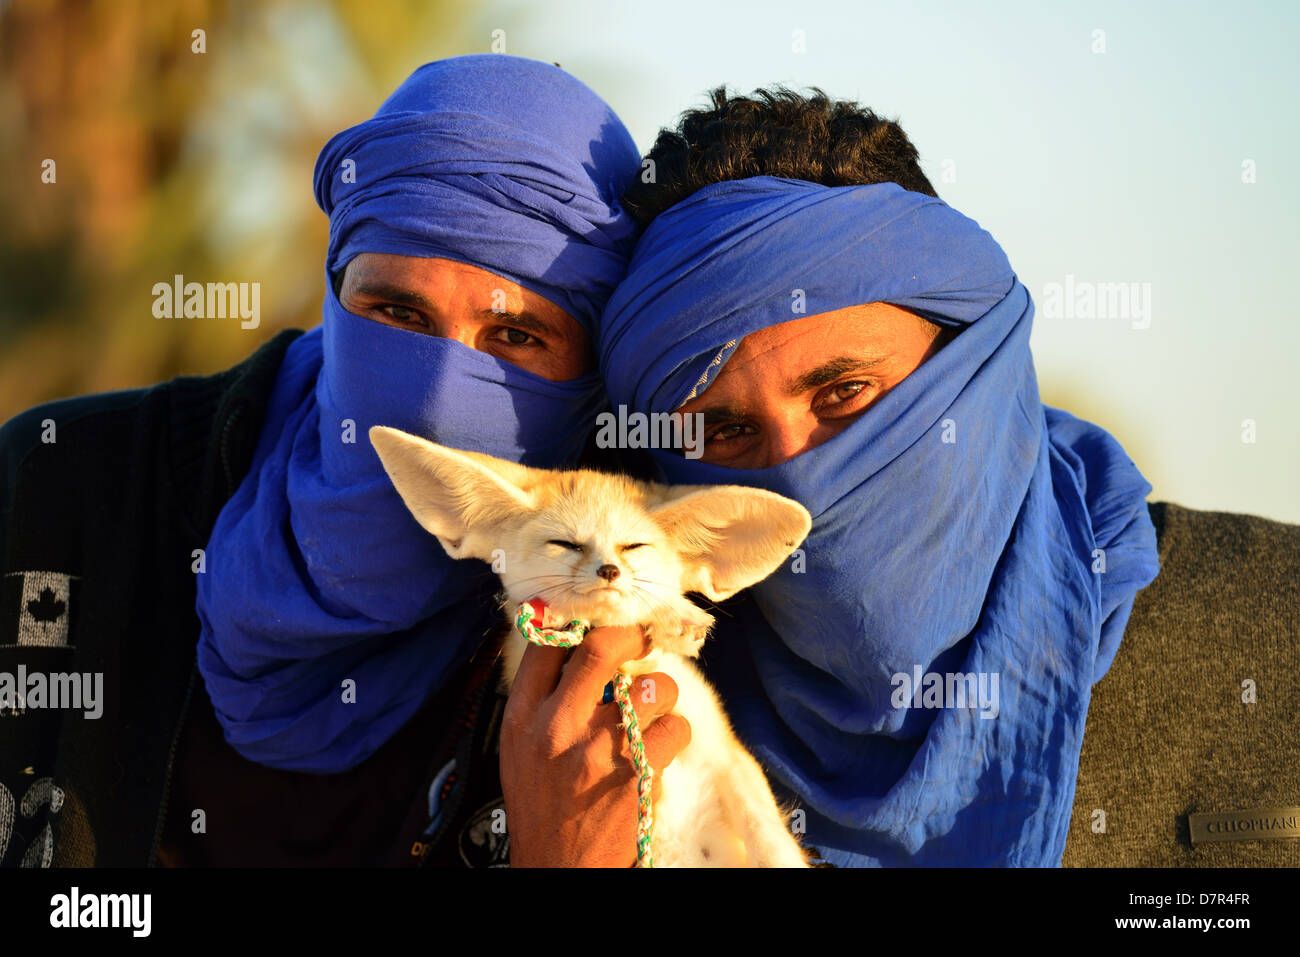 Young Bedouins in the dunes at Douz, South of Tunisia. Stock Photo